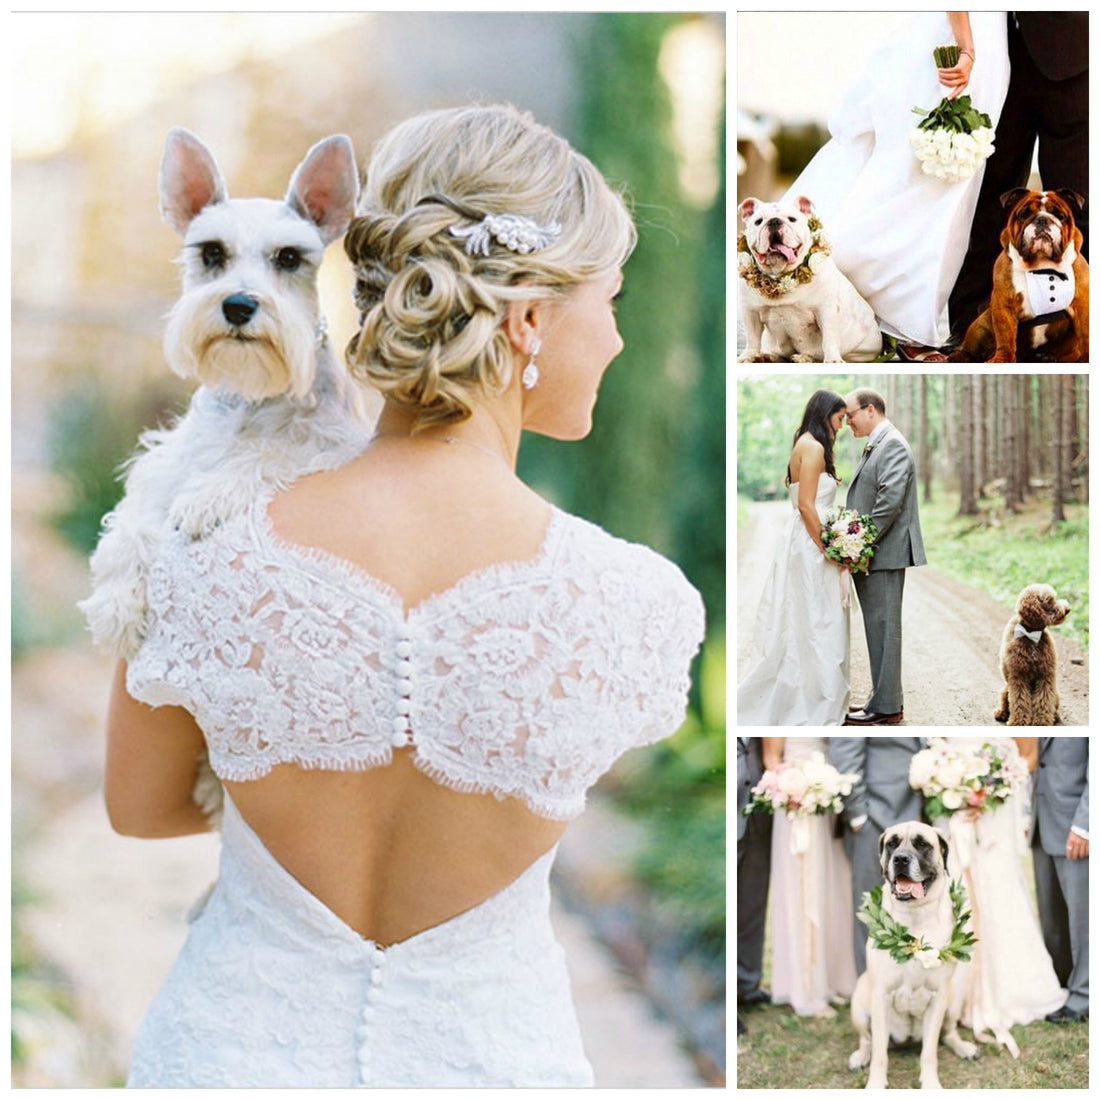 Nine Adorable Ways to Include Pets in Your Wedding